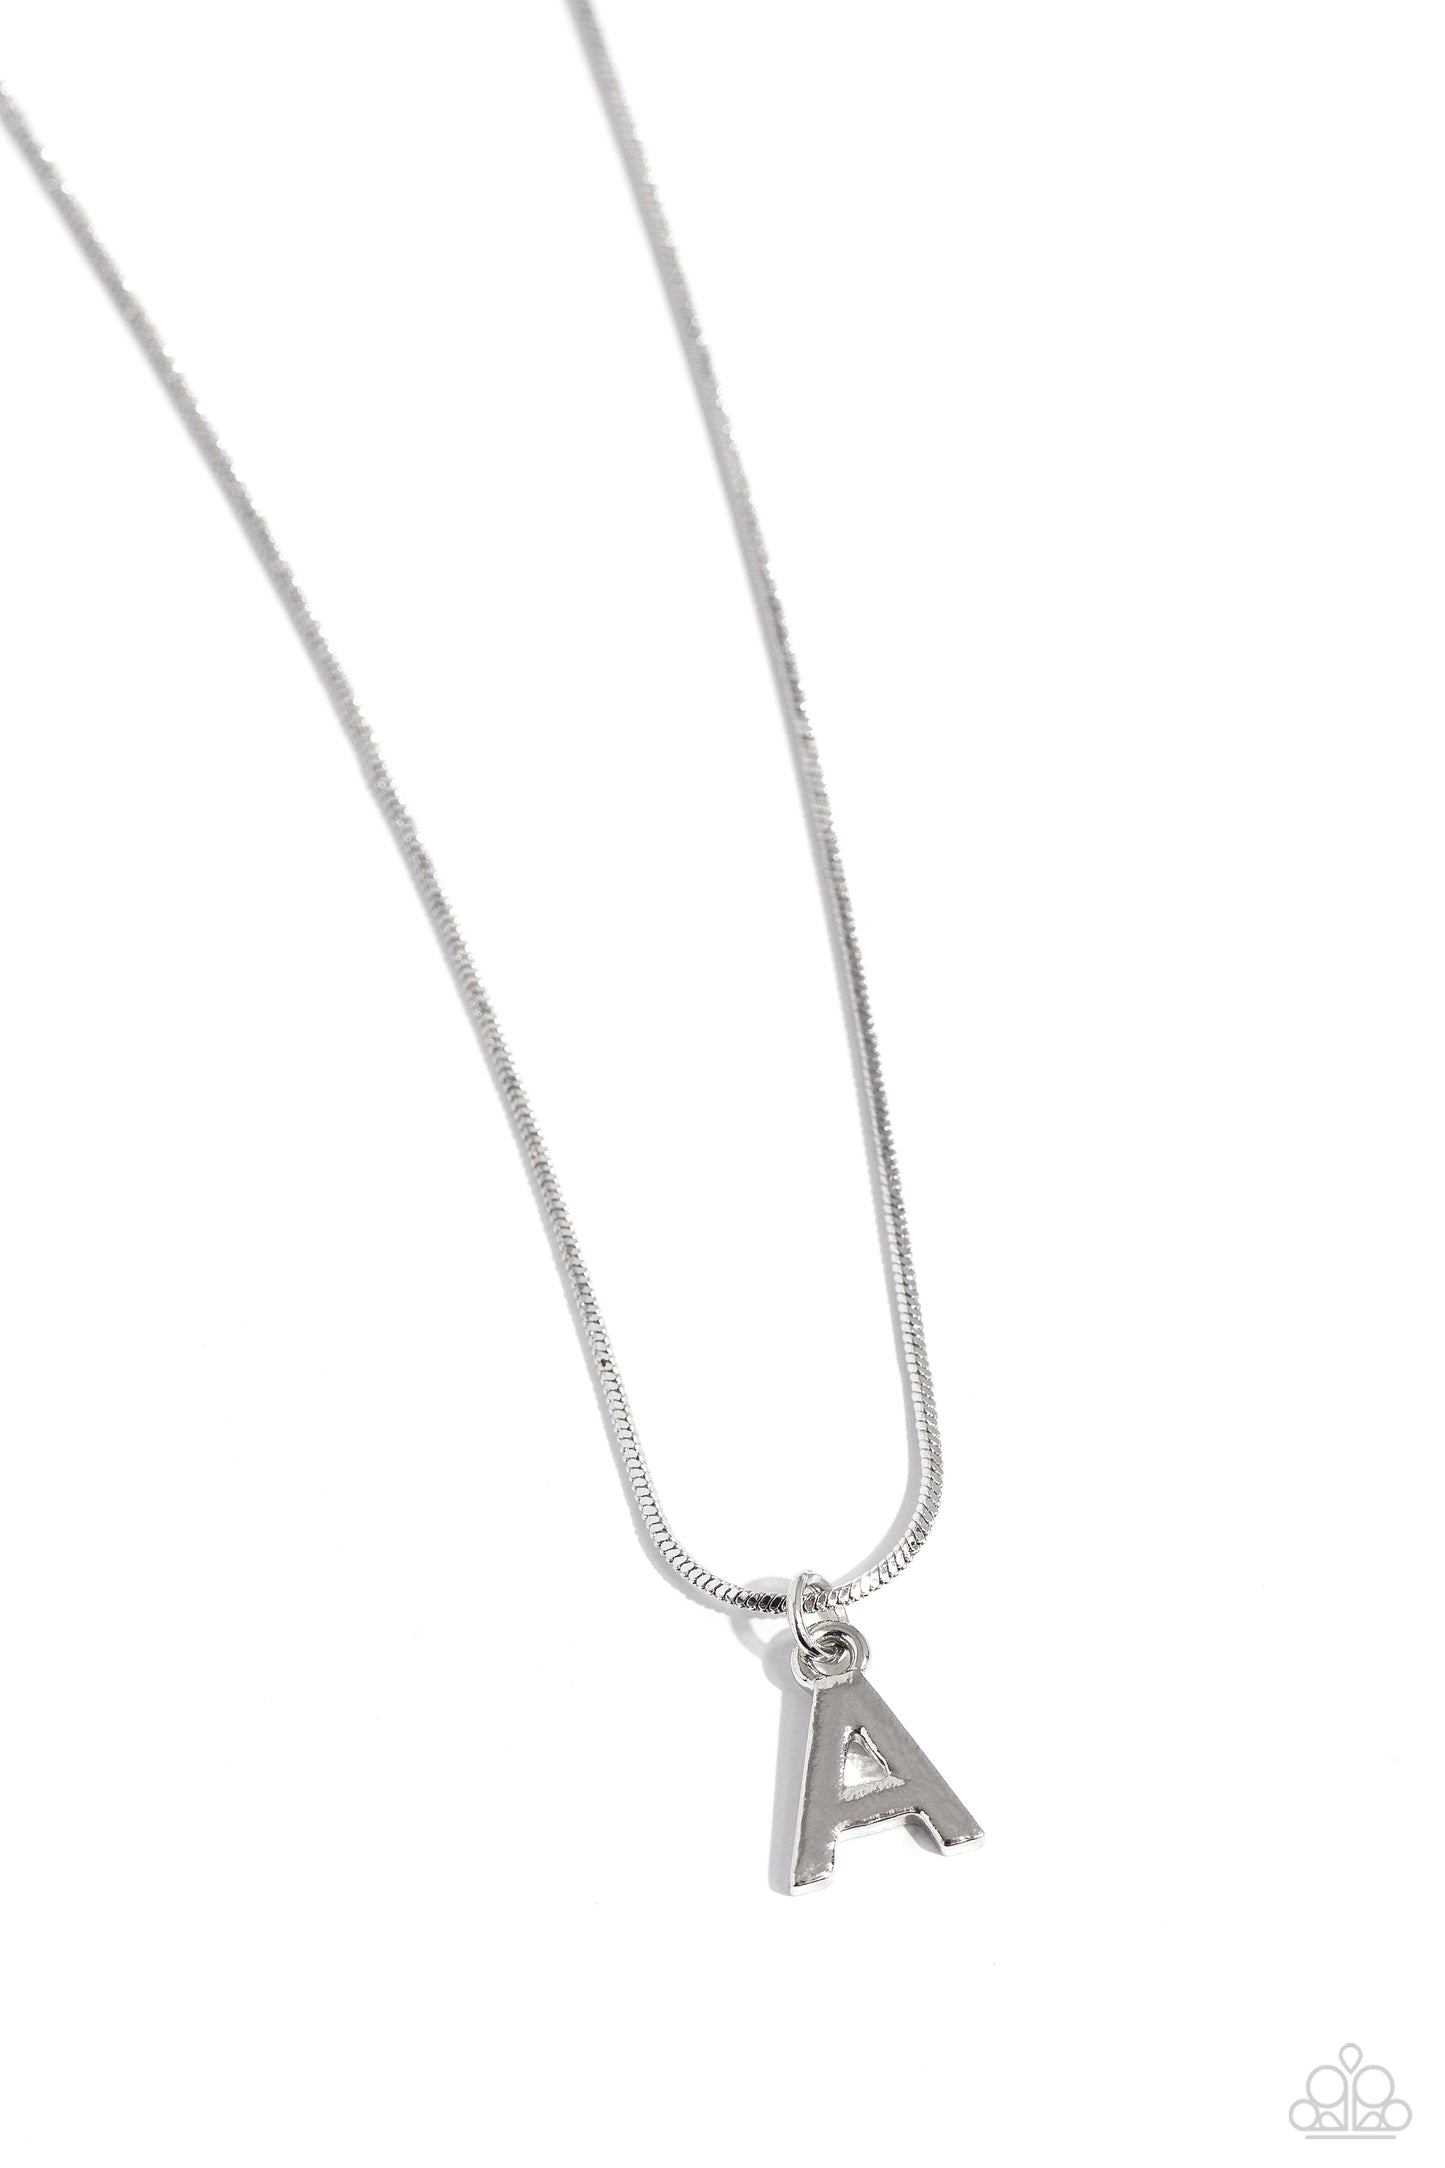 Seize the Initial - Silver - A Necklace